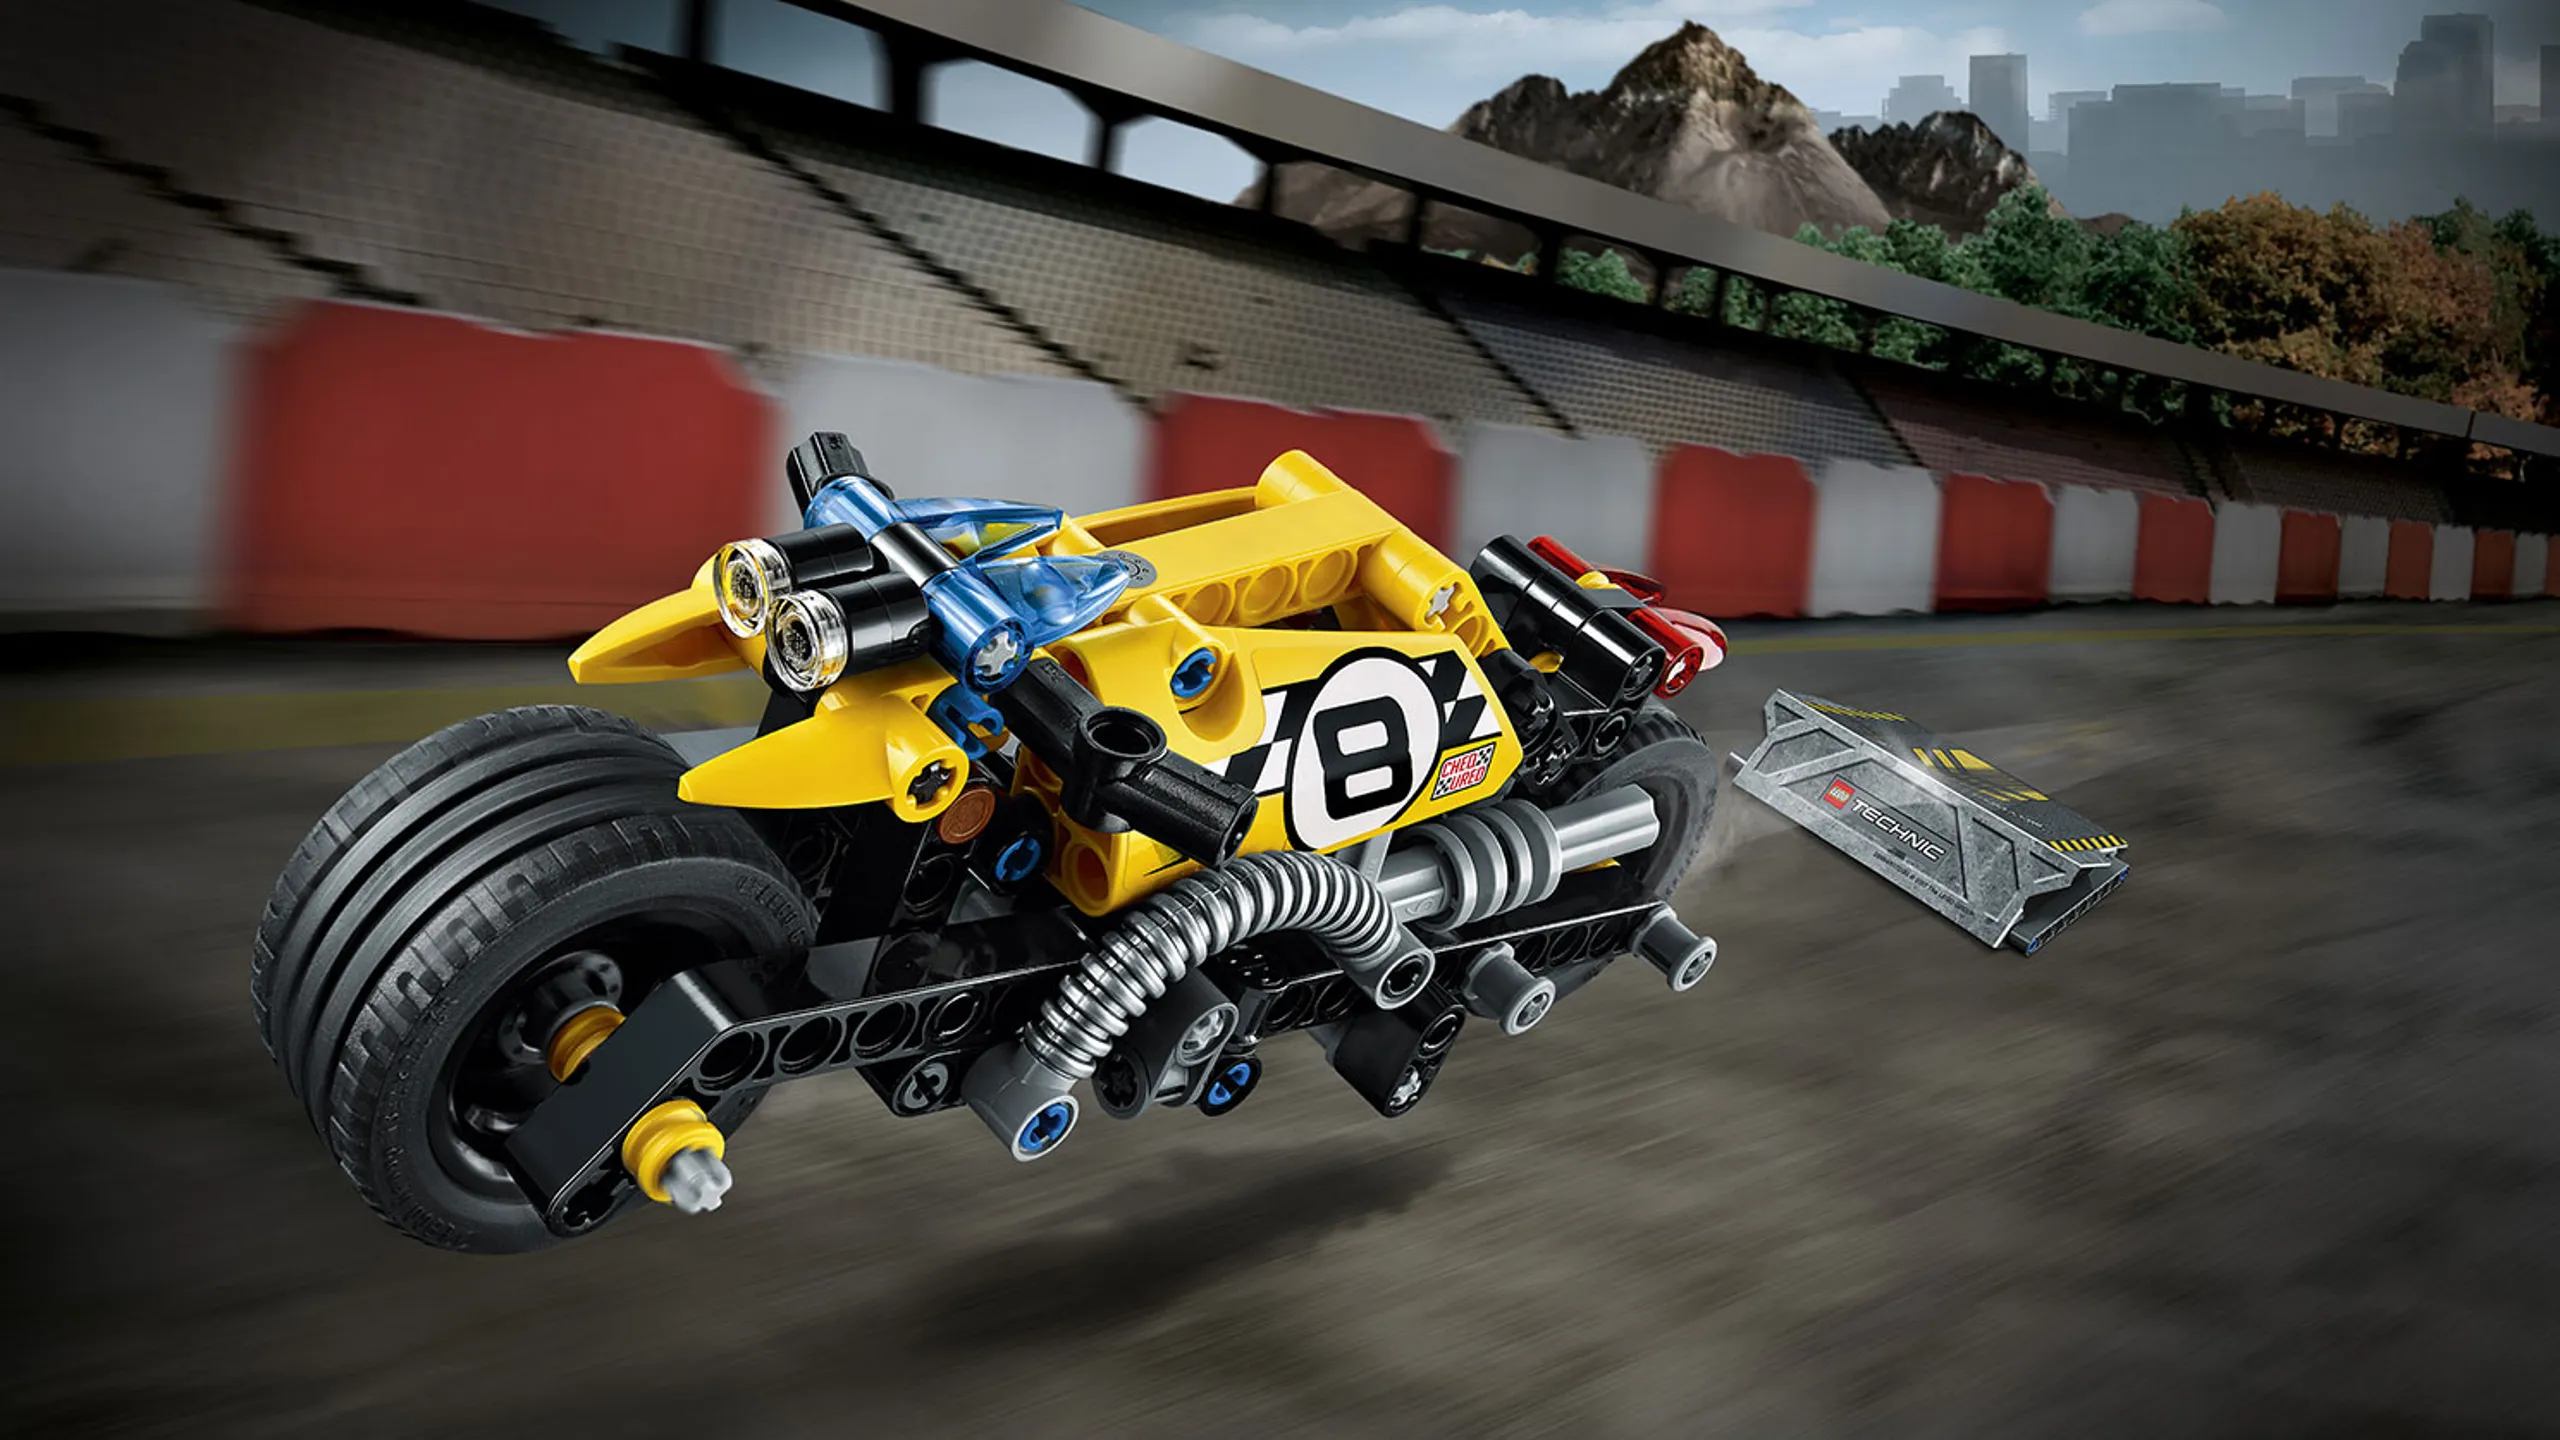 LEGO Technic - 42058 Stunt Bike - Try this cool stunt bike with pull-back motor, front and rear lights, cool exhaust pipes and extra-wide rims with low profile tires for extra grip and balance.